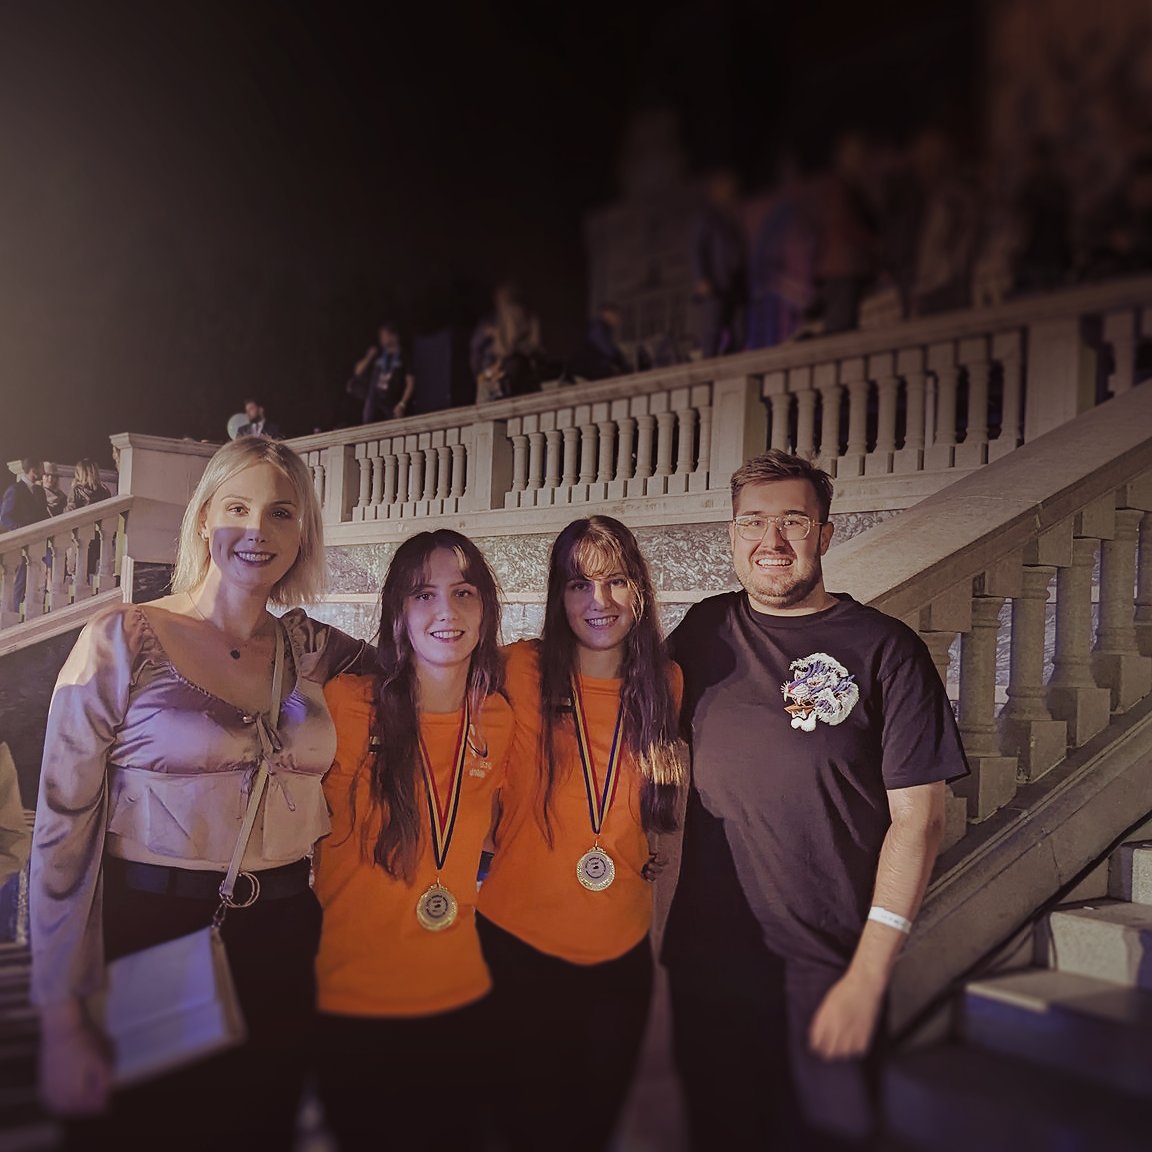 Champions of the game, leaders of the show! I'm telling you, guys; when passion meets talent, you conquer every stage. 🏆🥇🎙️

@LucyLuce_ @BDogCSGO @iesf_official @NIP @bvesportsNL @esportbond @Qiyarahcs @Nayomy_cs

#iesf #wec23 #WorldEsports #Iasi2023 #goninjas